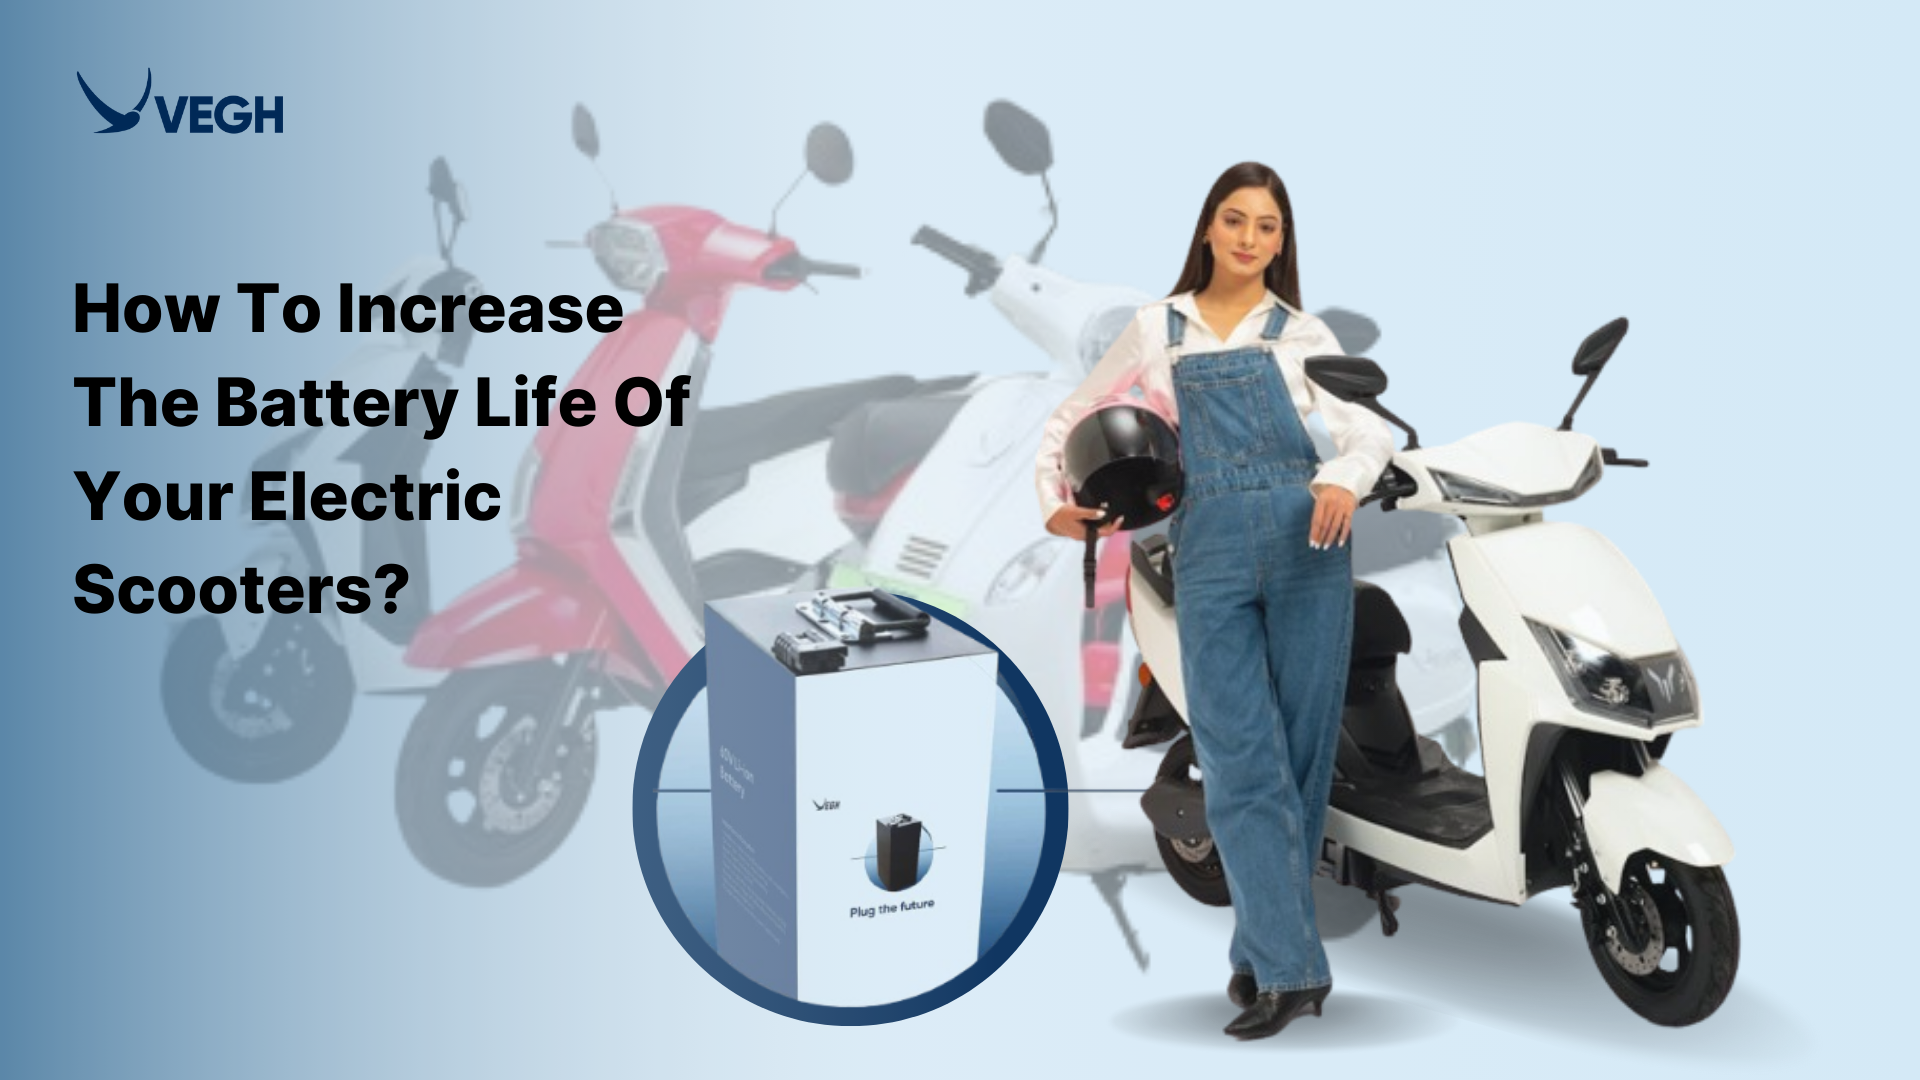 How To Increase The Battery Life Of Your Electric Scooters